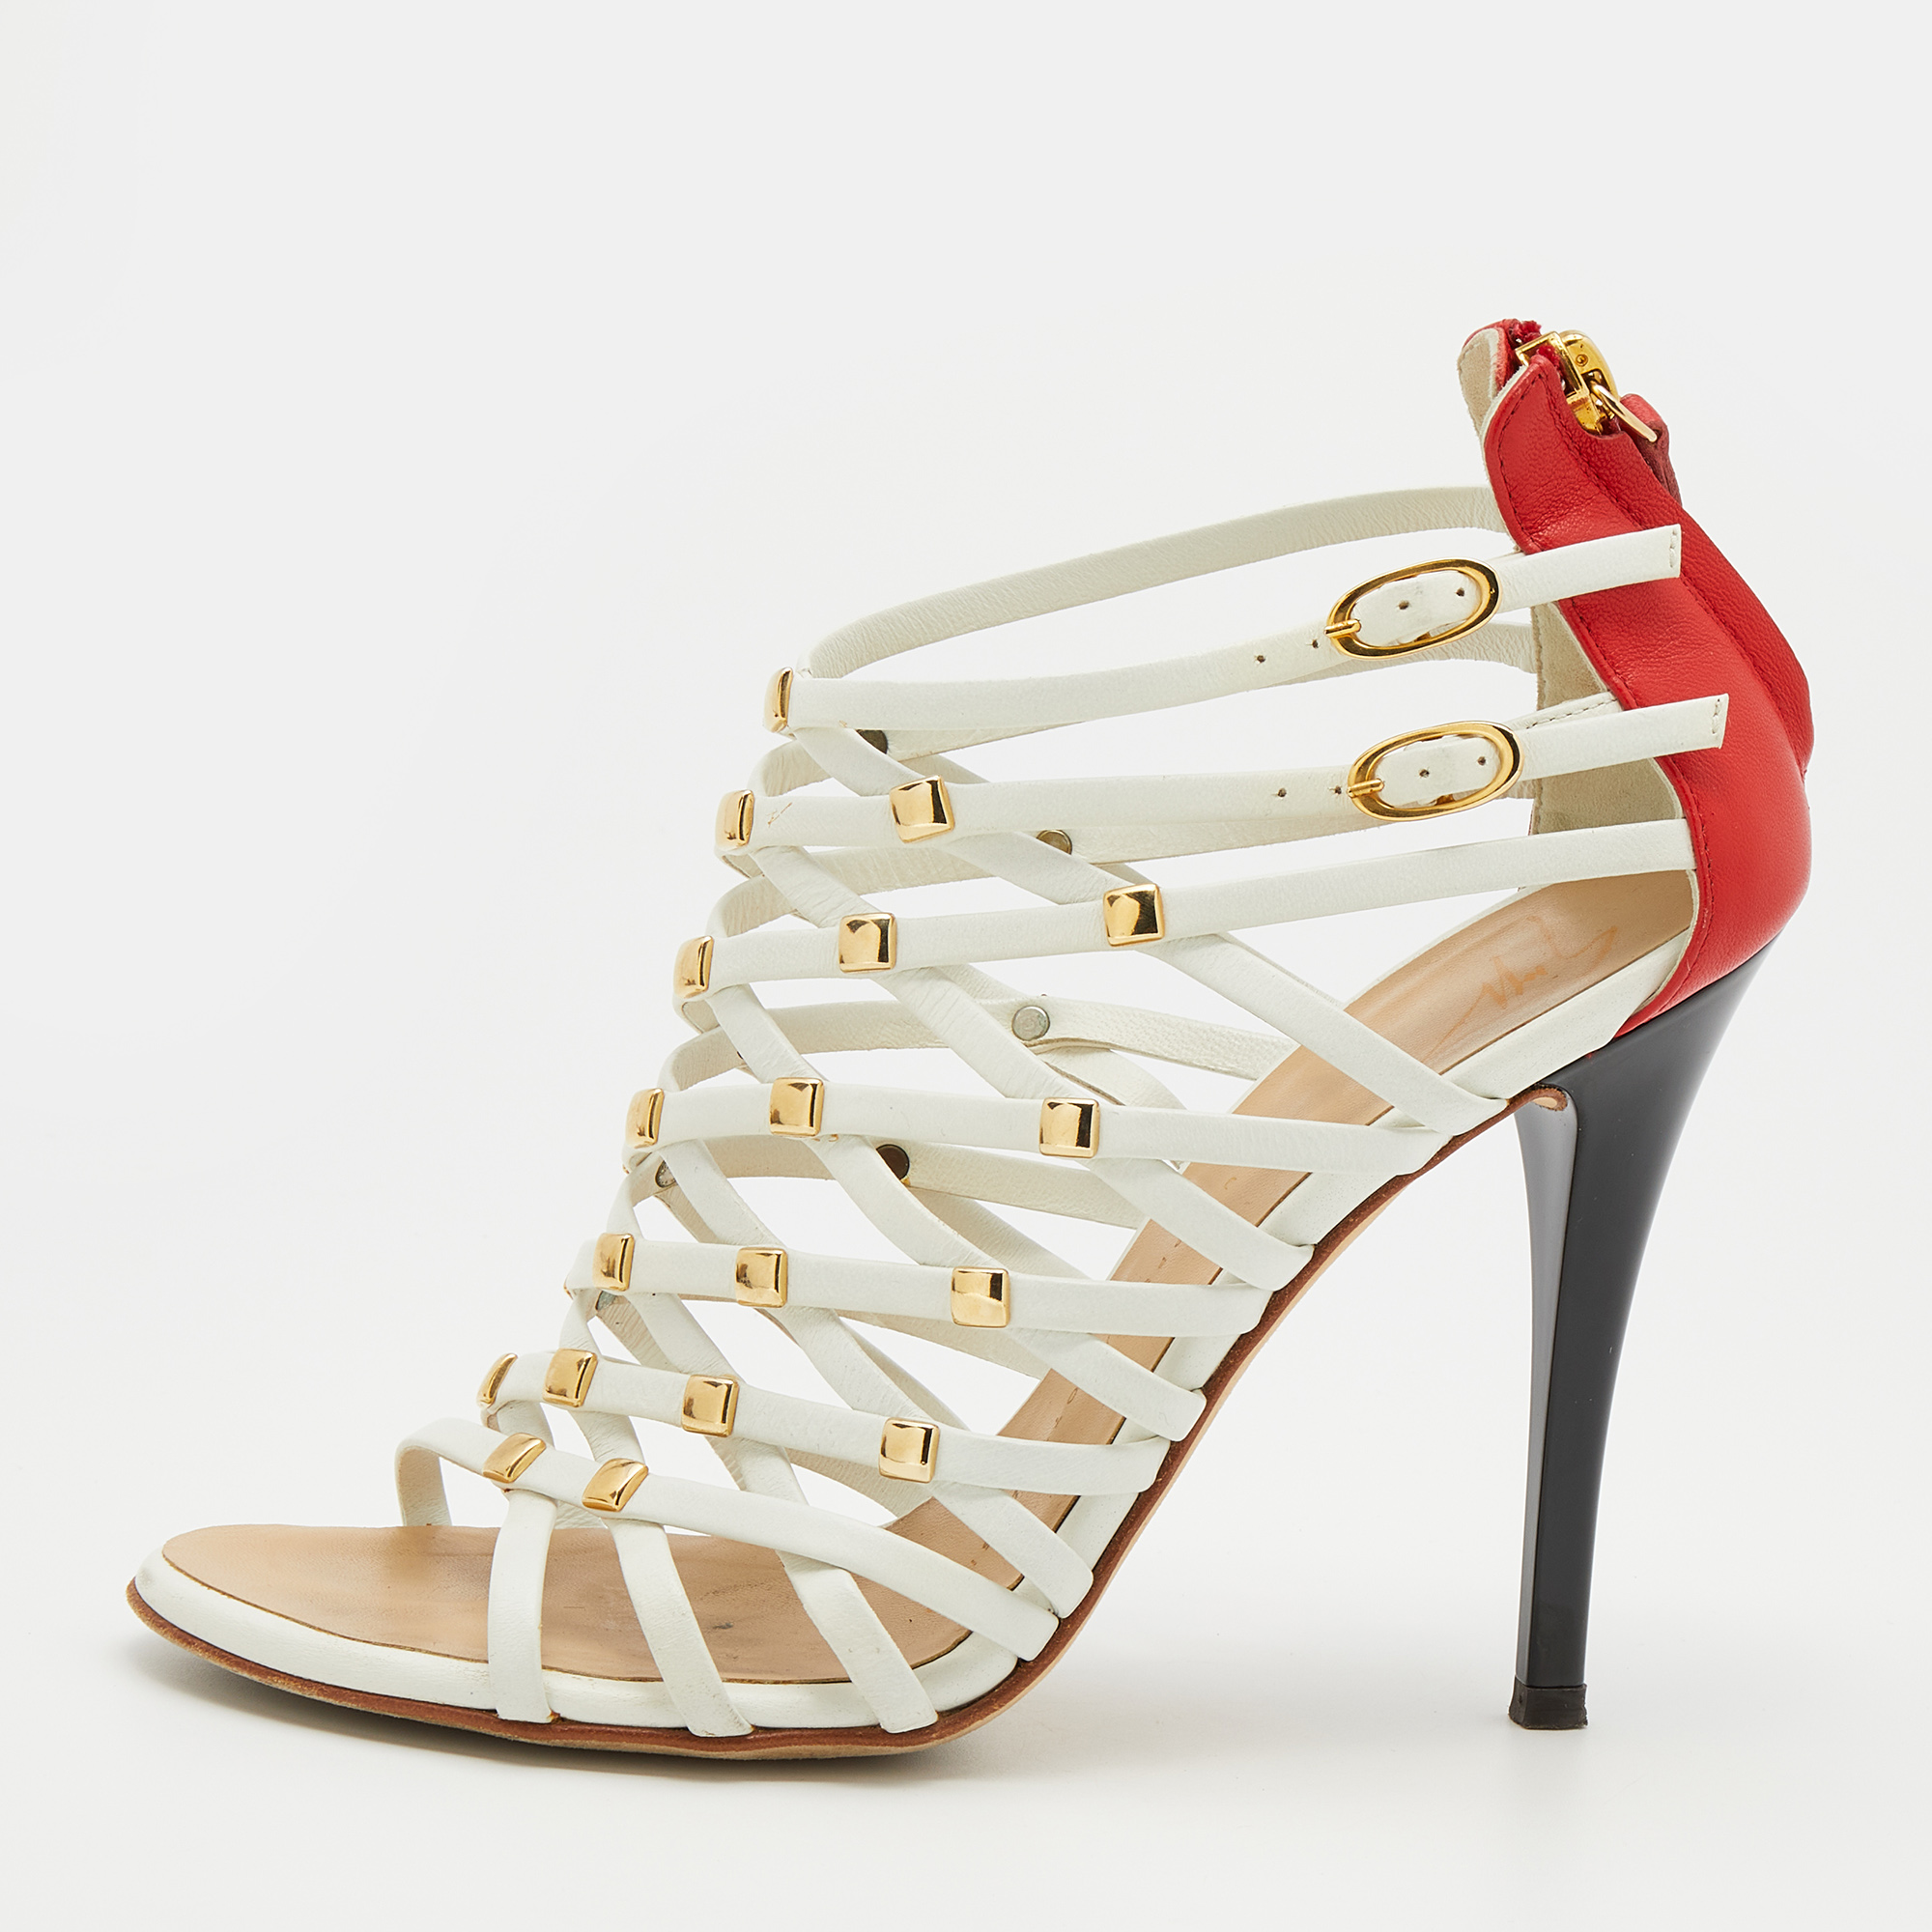 Pre-owned Giuseppe Zanotti White/red Leather Embellished Strappy Sandals Size 36